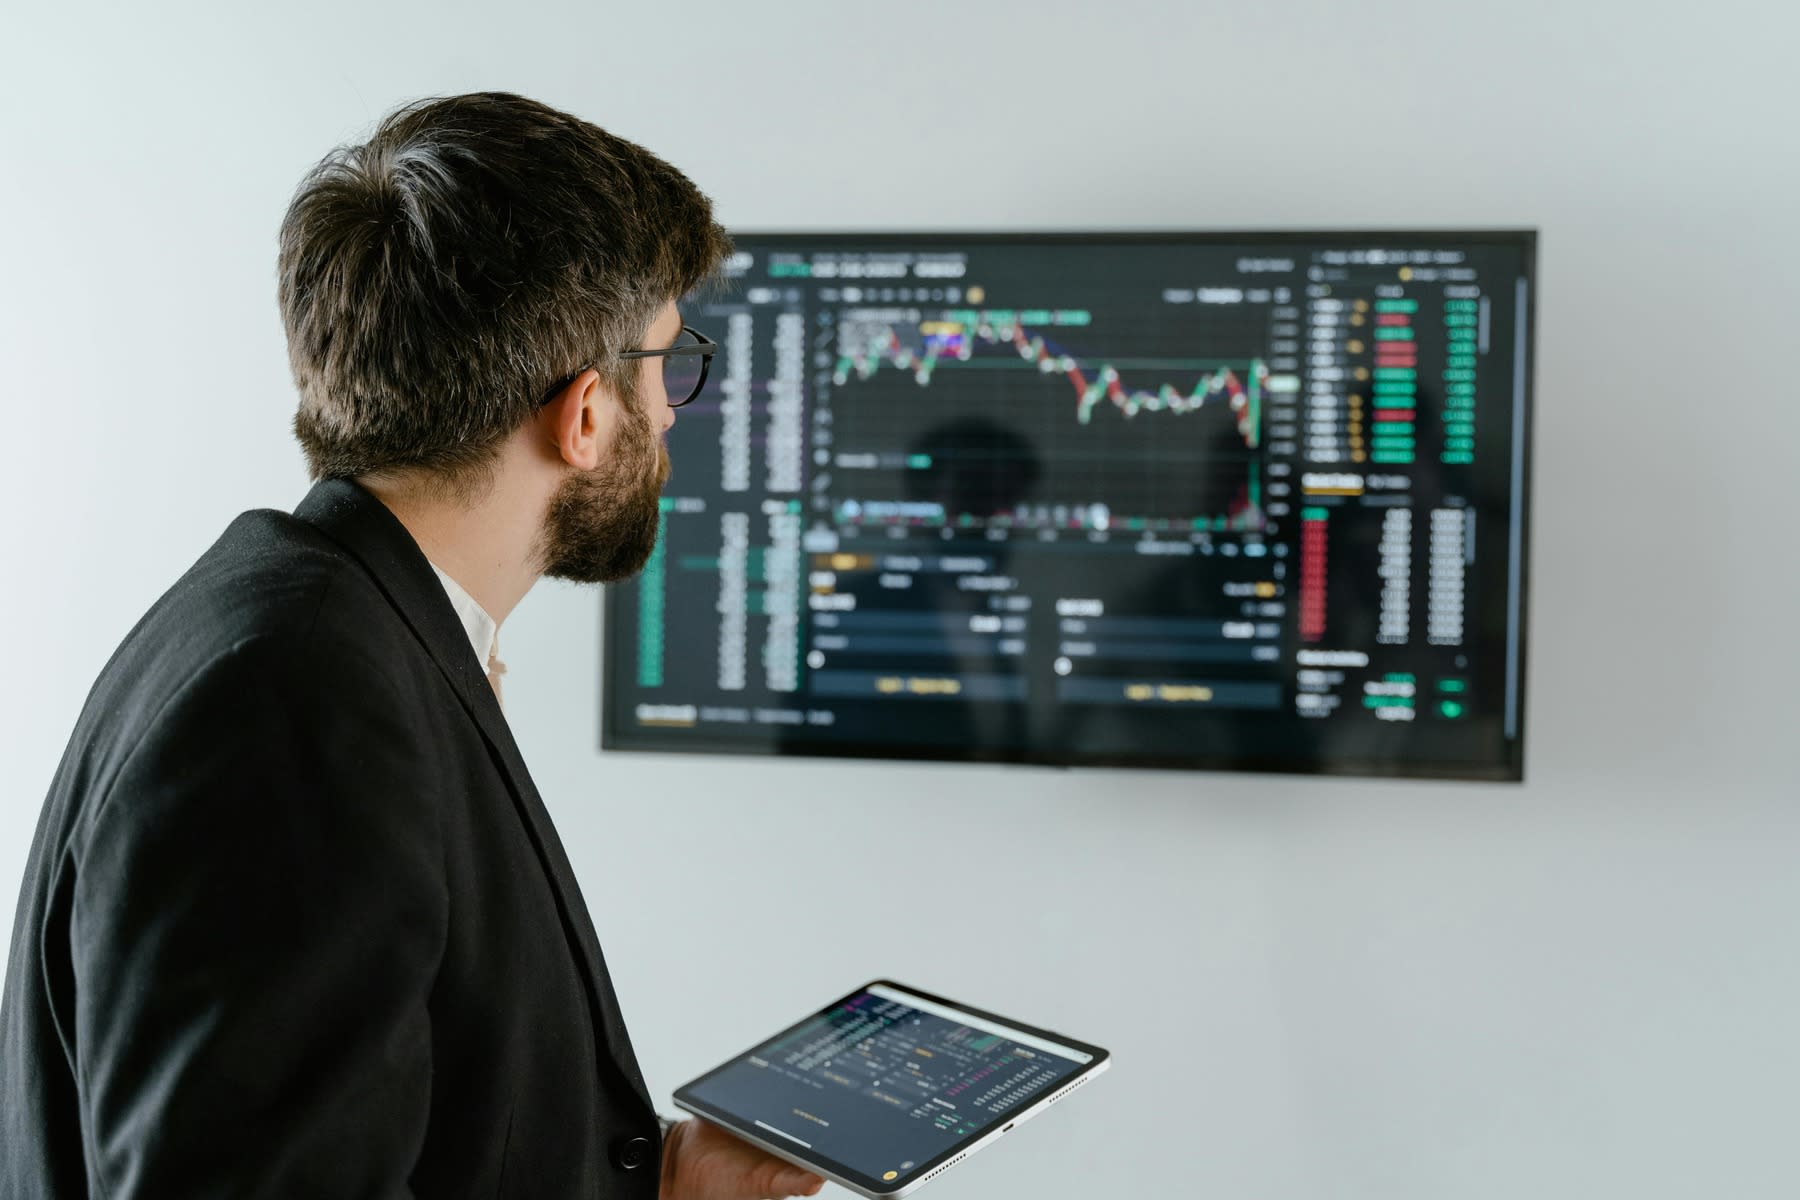 Man holding a tablet while looking at a monitor with data analytics data